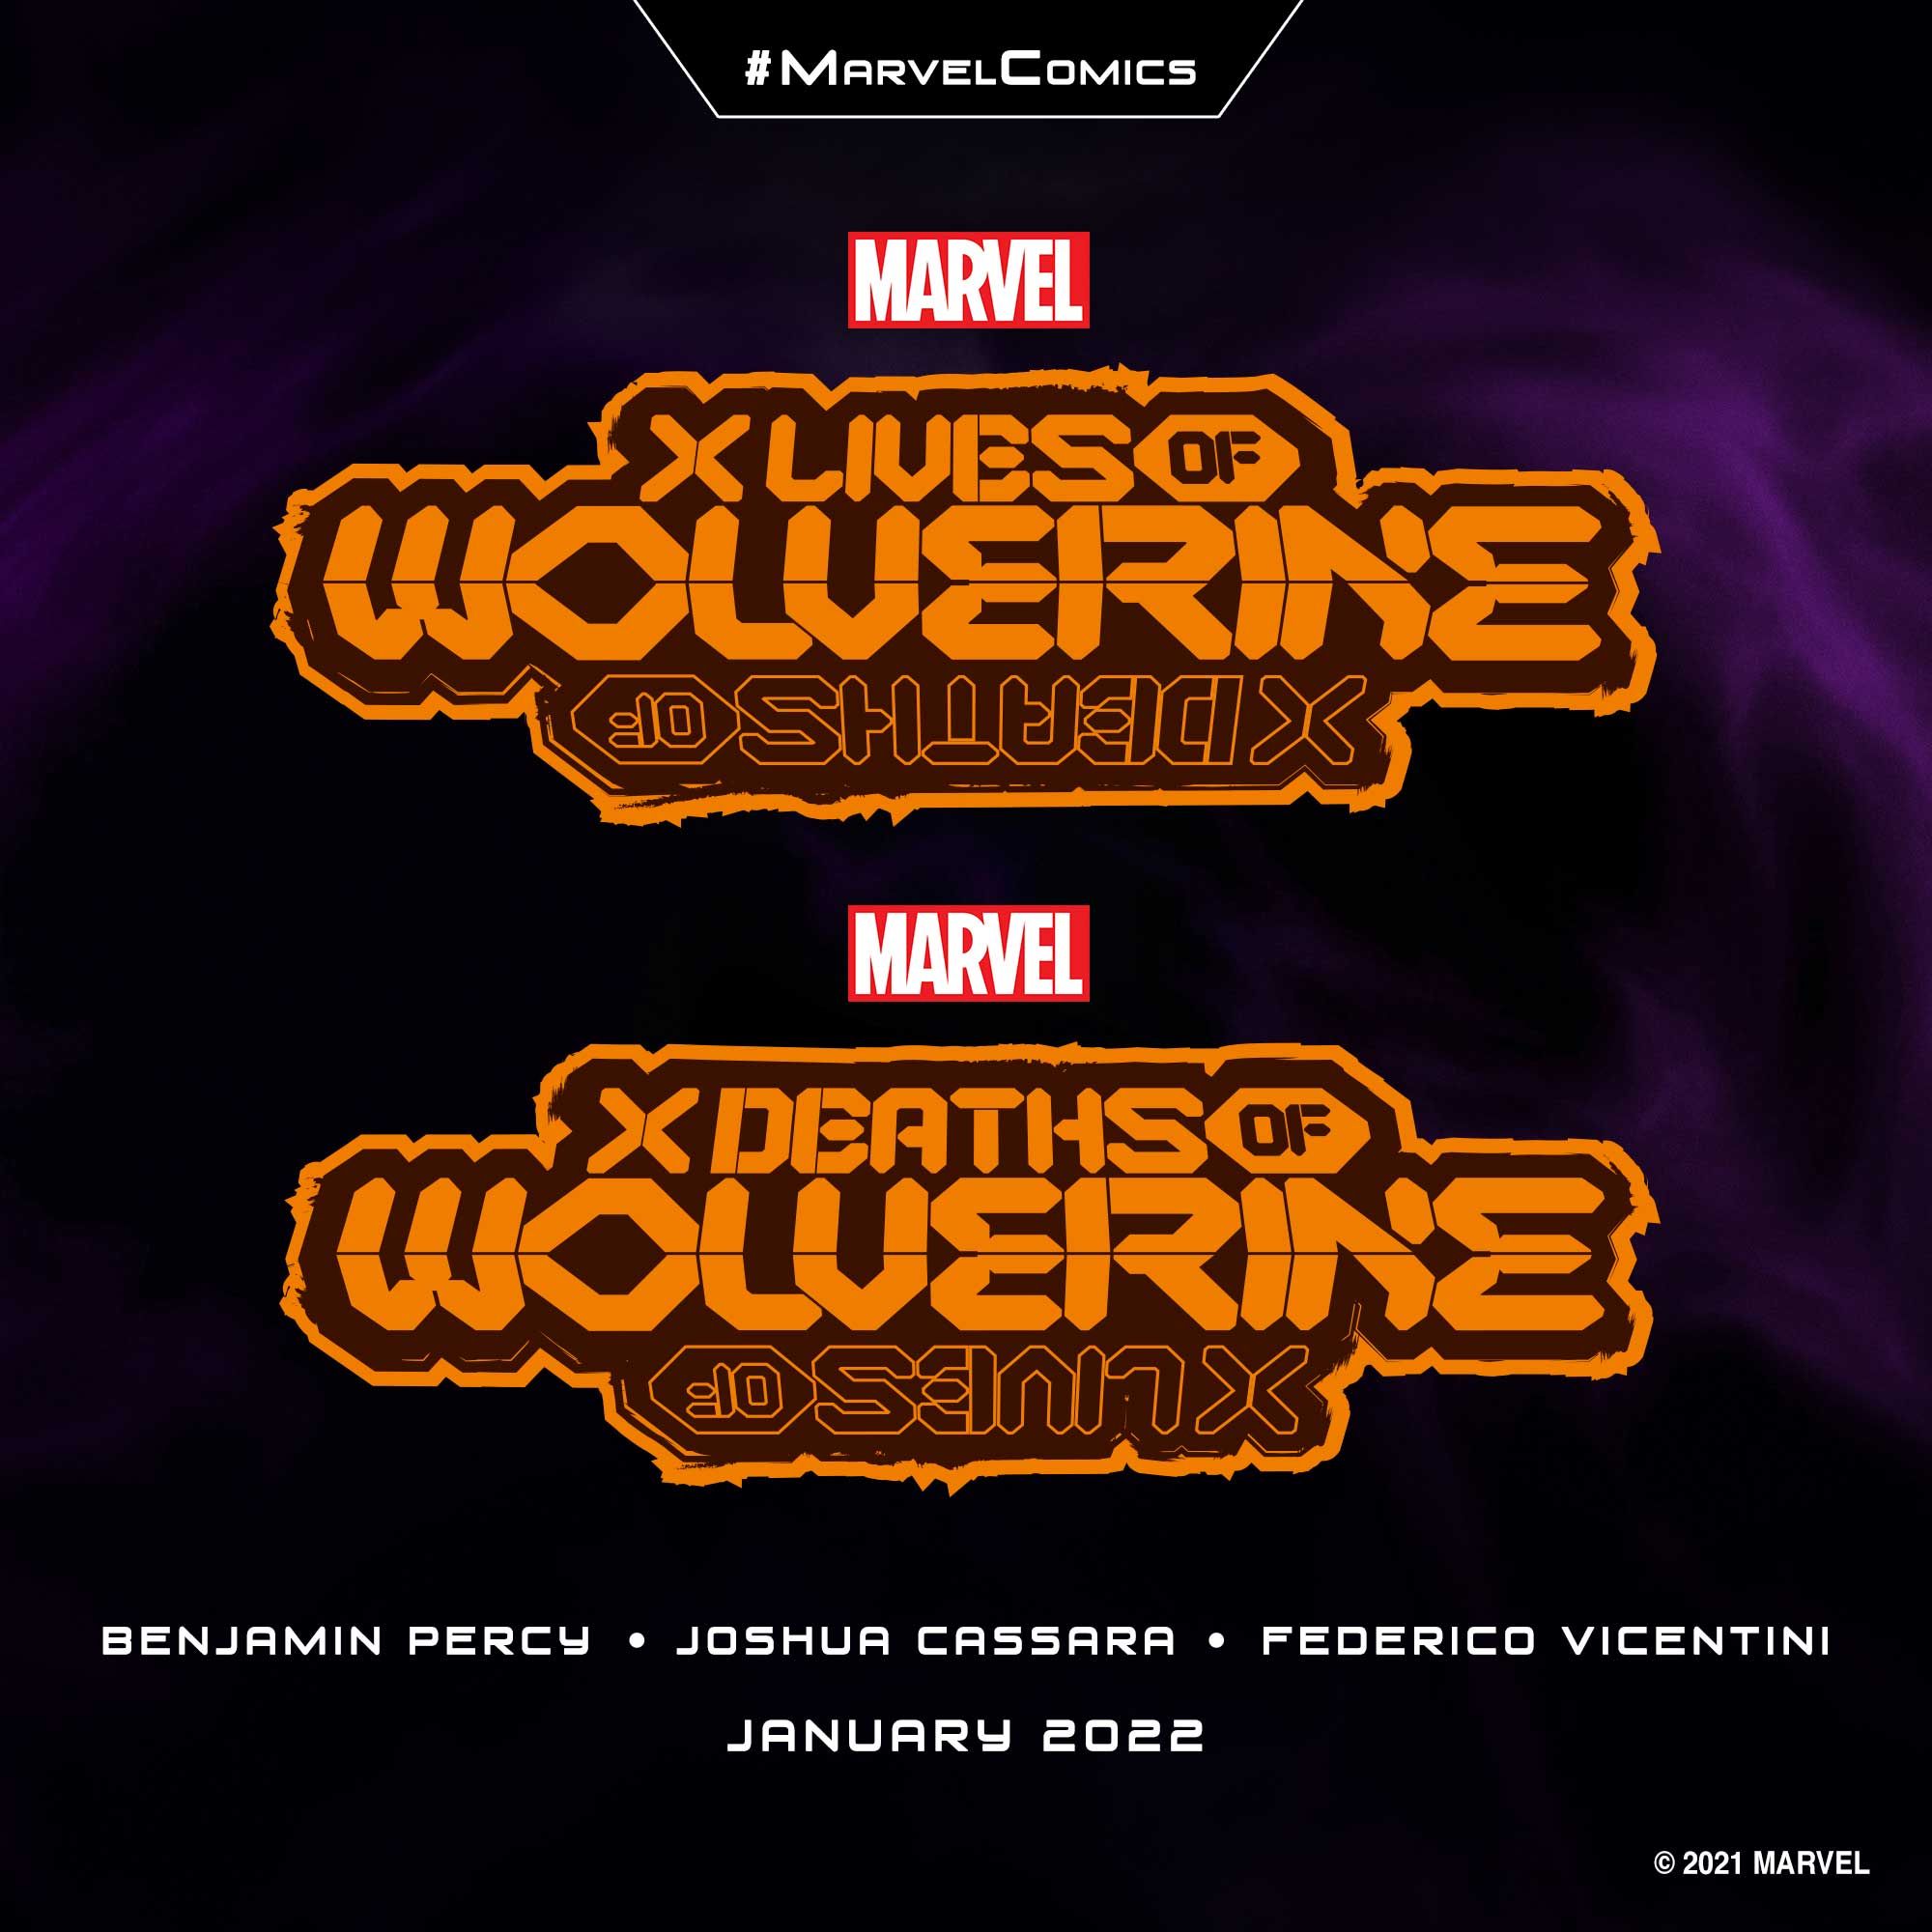 X Lives of Wolverine and X Deaths of Wolverine logos